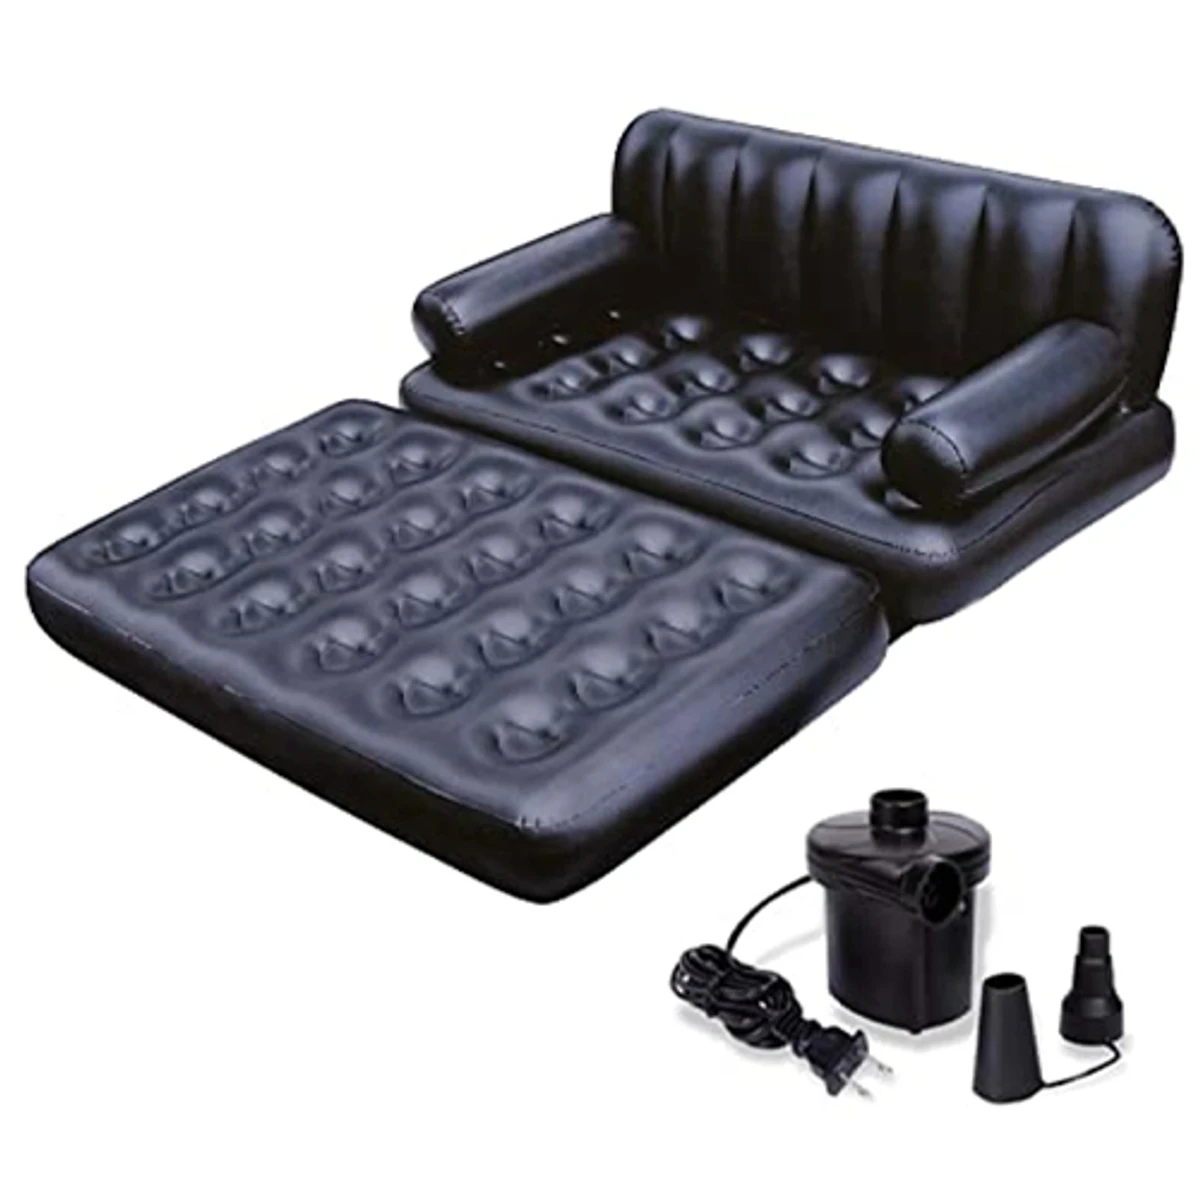 5 in 1 Inflatable Double Air Sofa Bed - Black